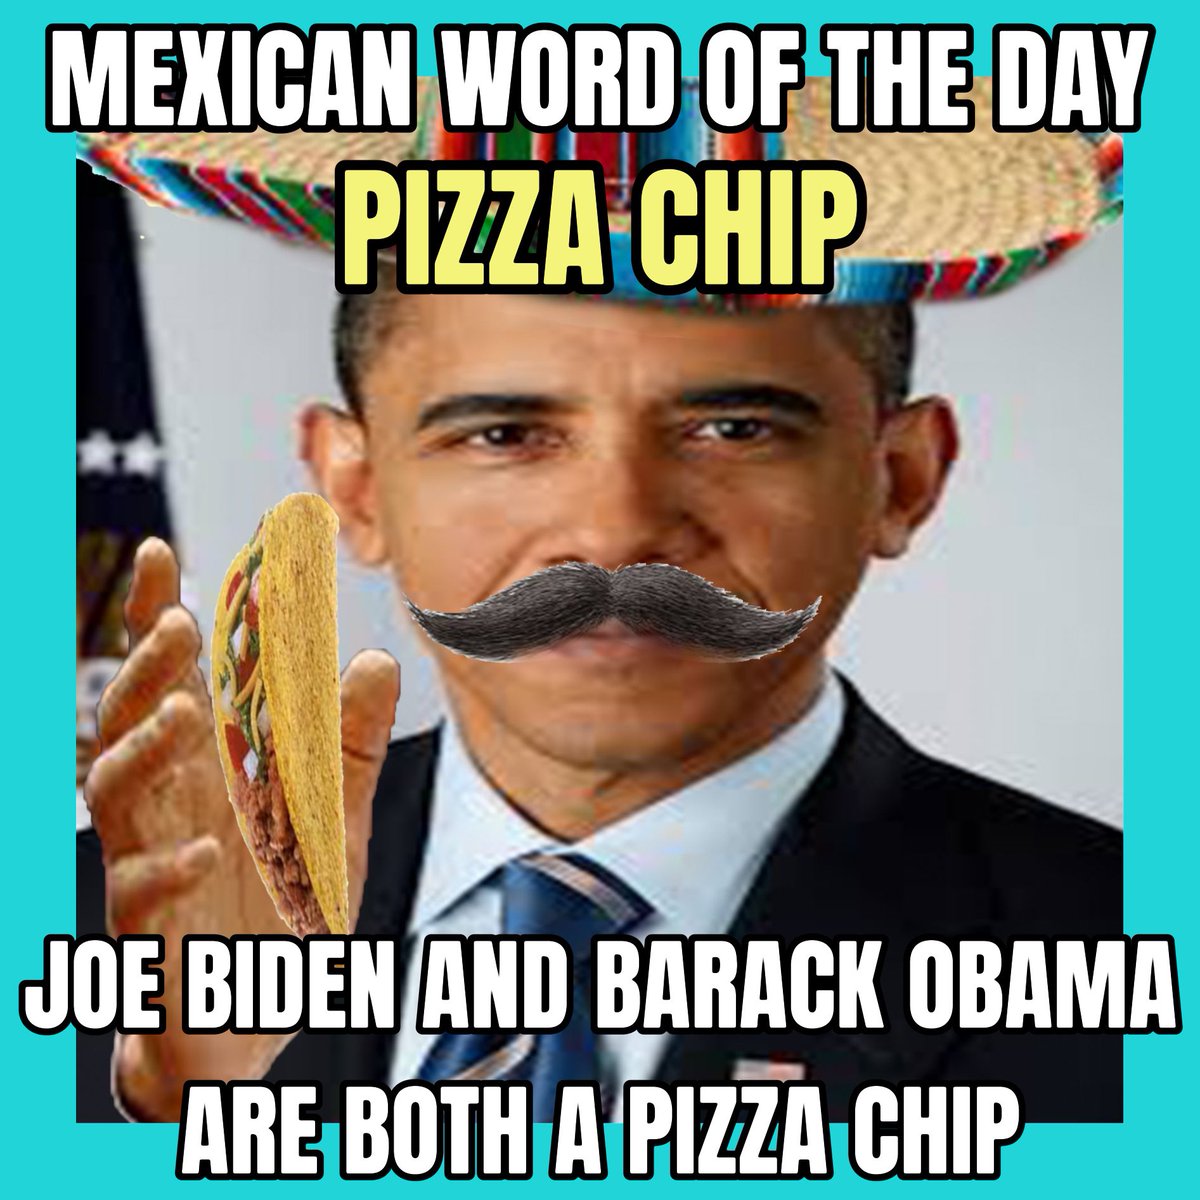 Dirty Sanchez Obama’s word of the day. BTW, in case you didn’t know it, Barack is actually Joe’s boss.